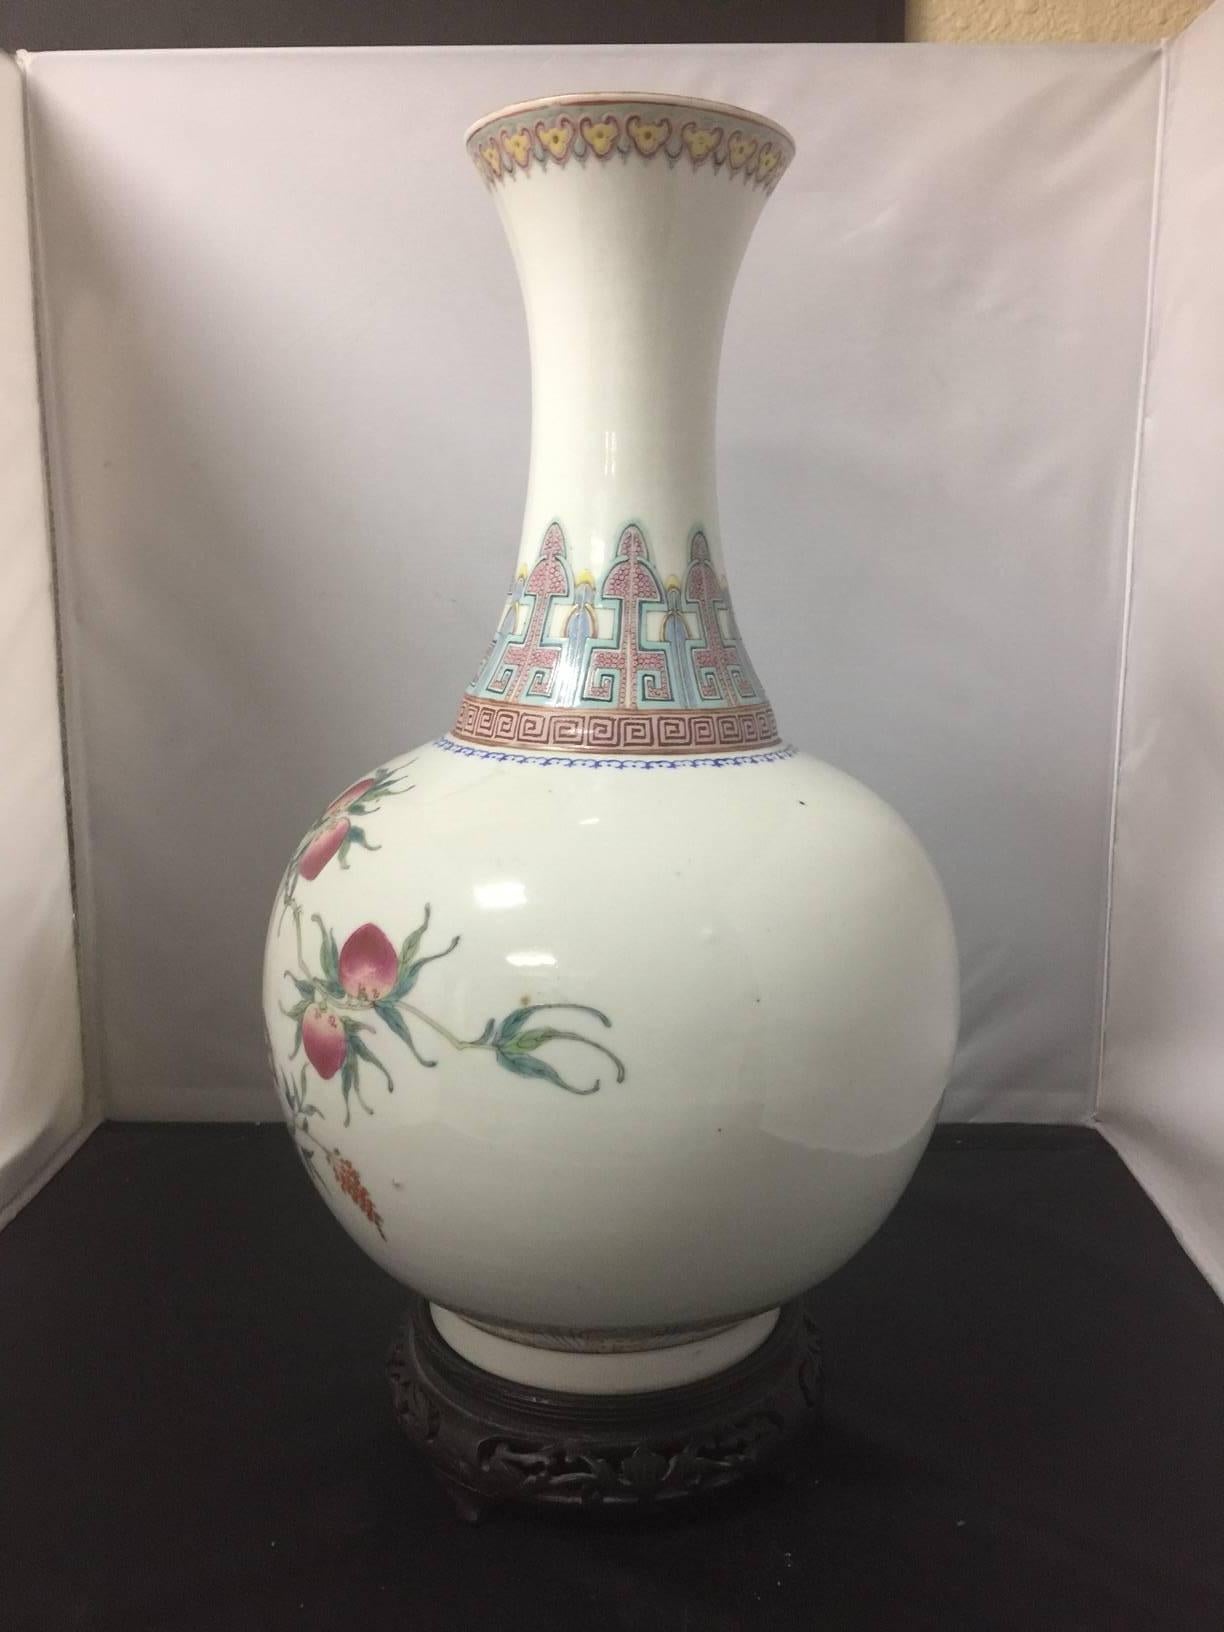 Spectacular and rare, tall (18") porcelain famille rose vase on a 2" wooden stand. The piece is in excellent vintage condition and bears the mark of the Hongxian period dating it to early 20th century. A Hongxian mark on a non-imperial